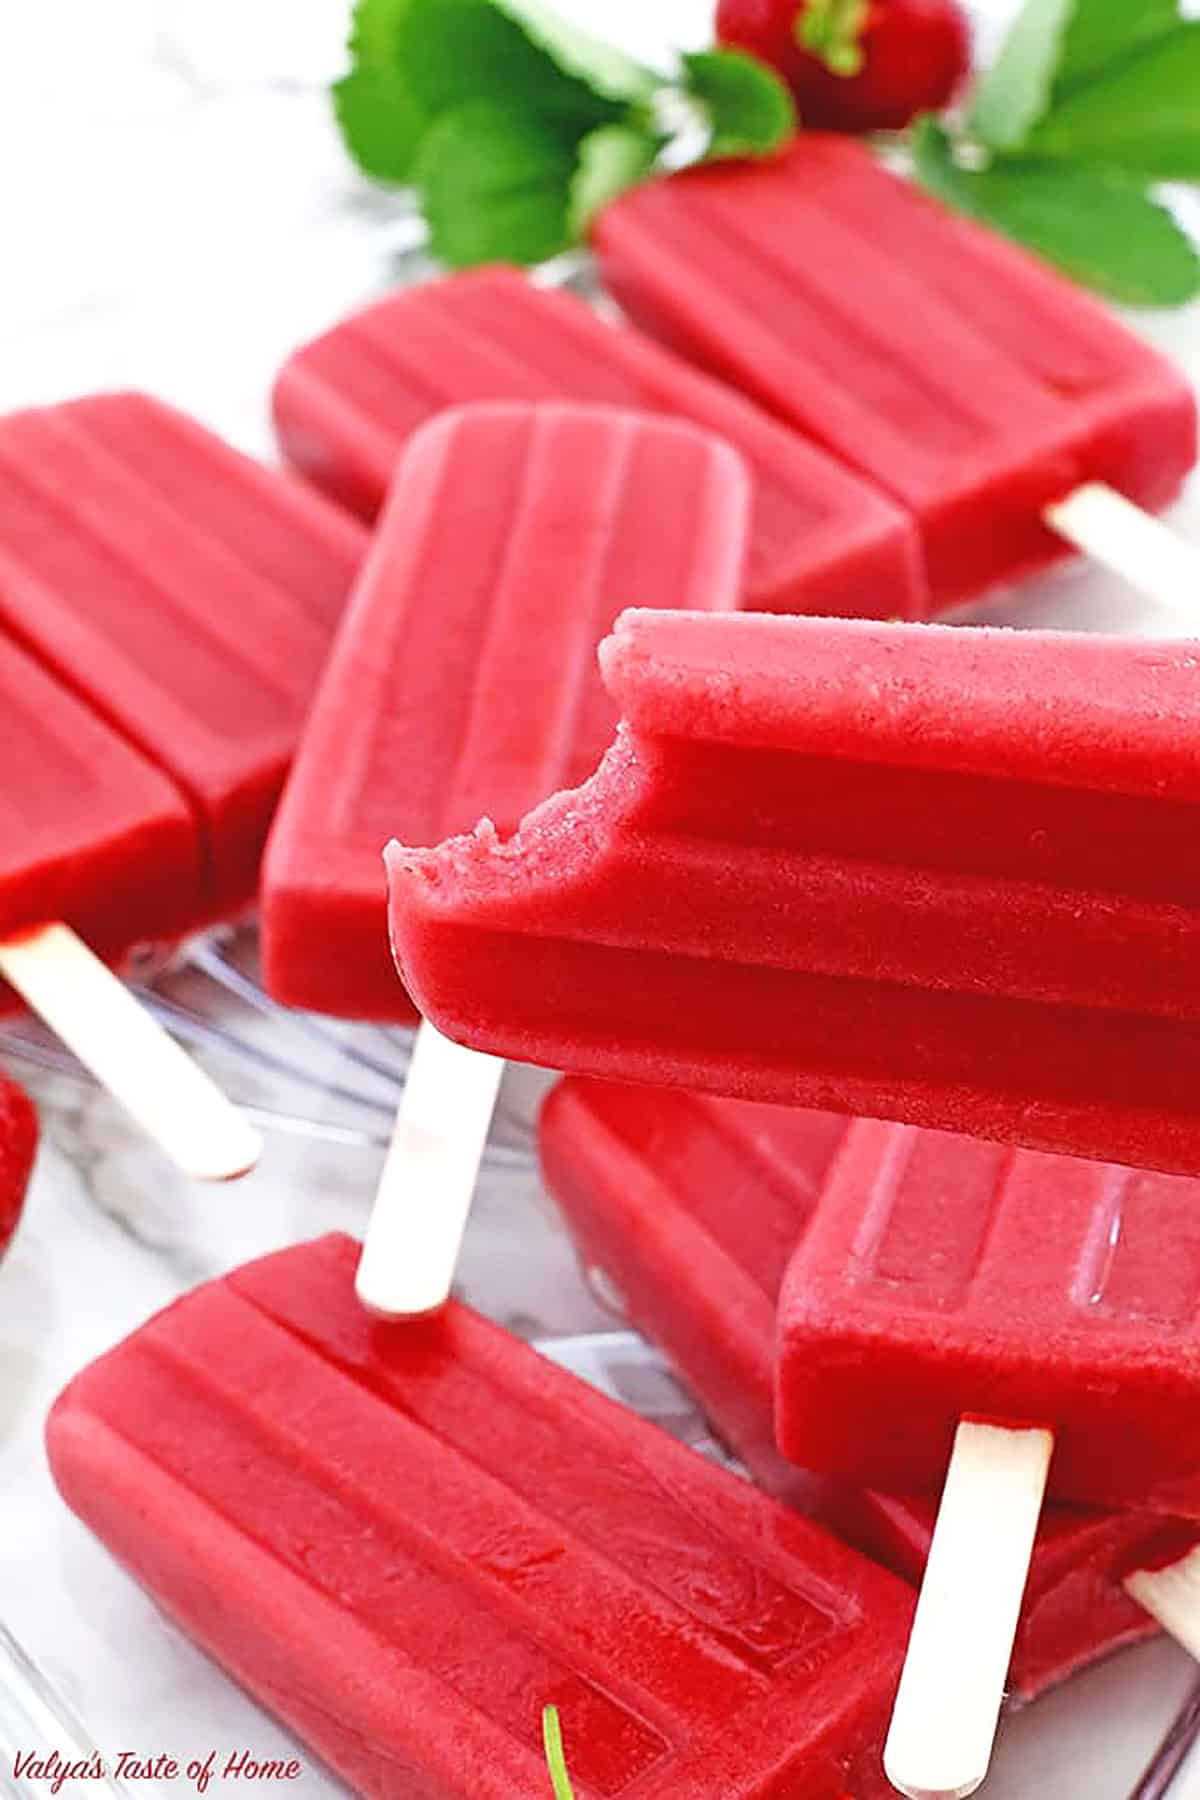 If you want the popsicles to last longer, wrap each one in plastic wrap before placing it in a freezer bag or container. I recommend having them within one month if you choose to store them this way.